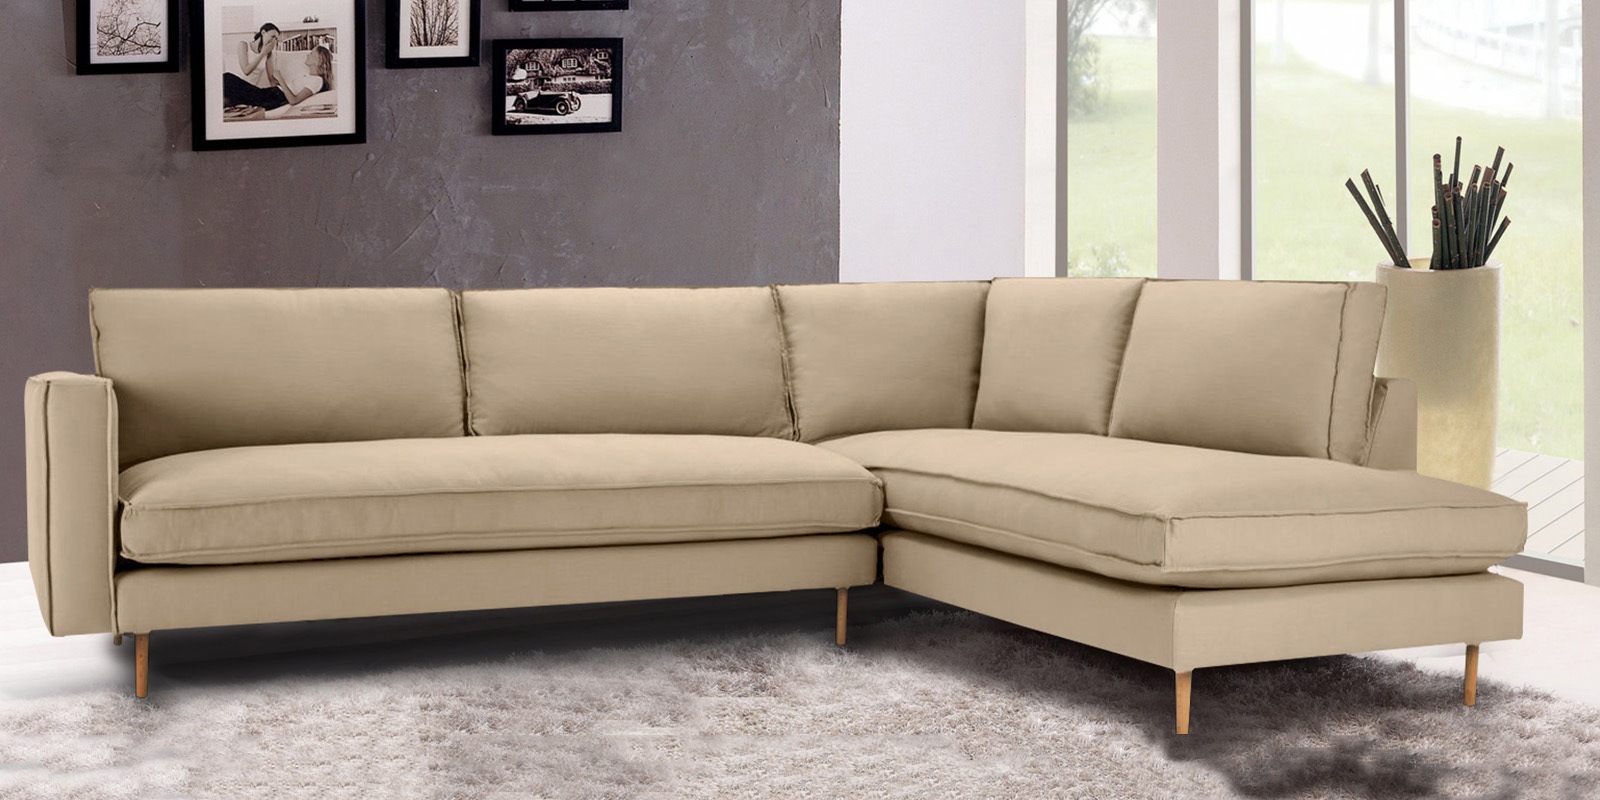 3 in 1 lounger sofa bed